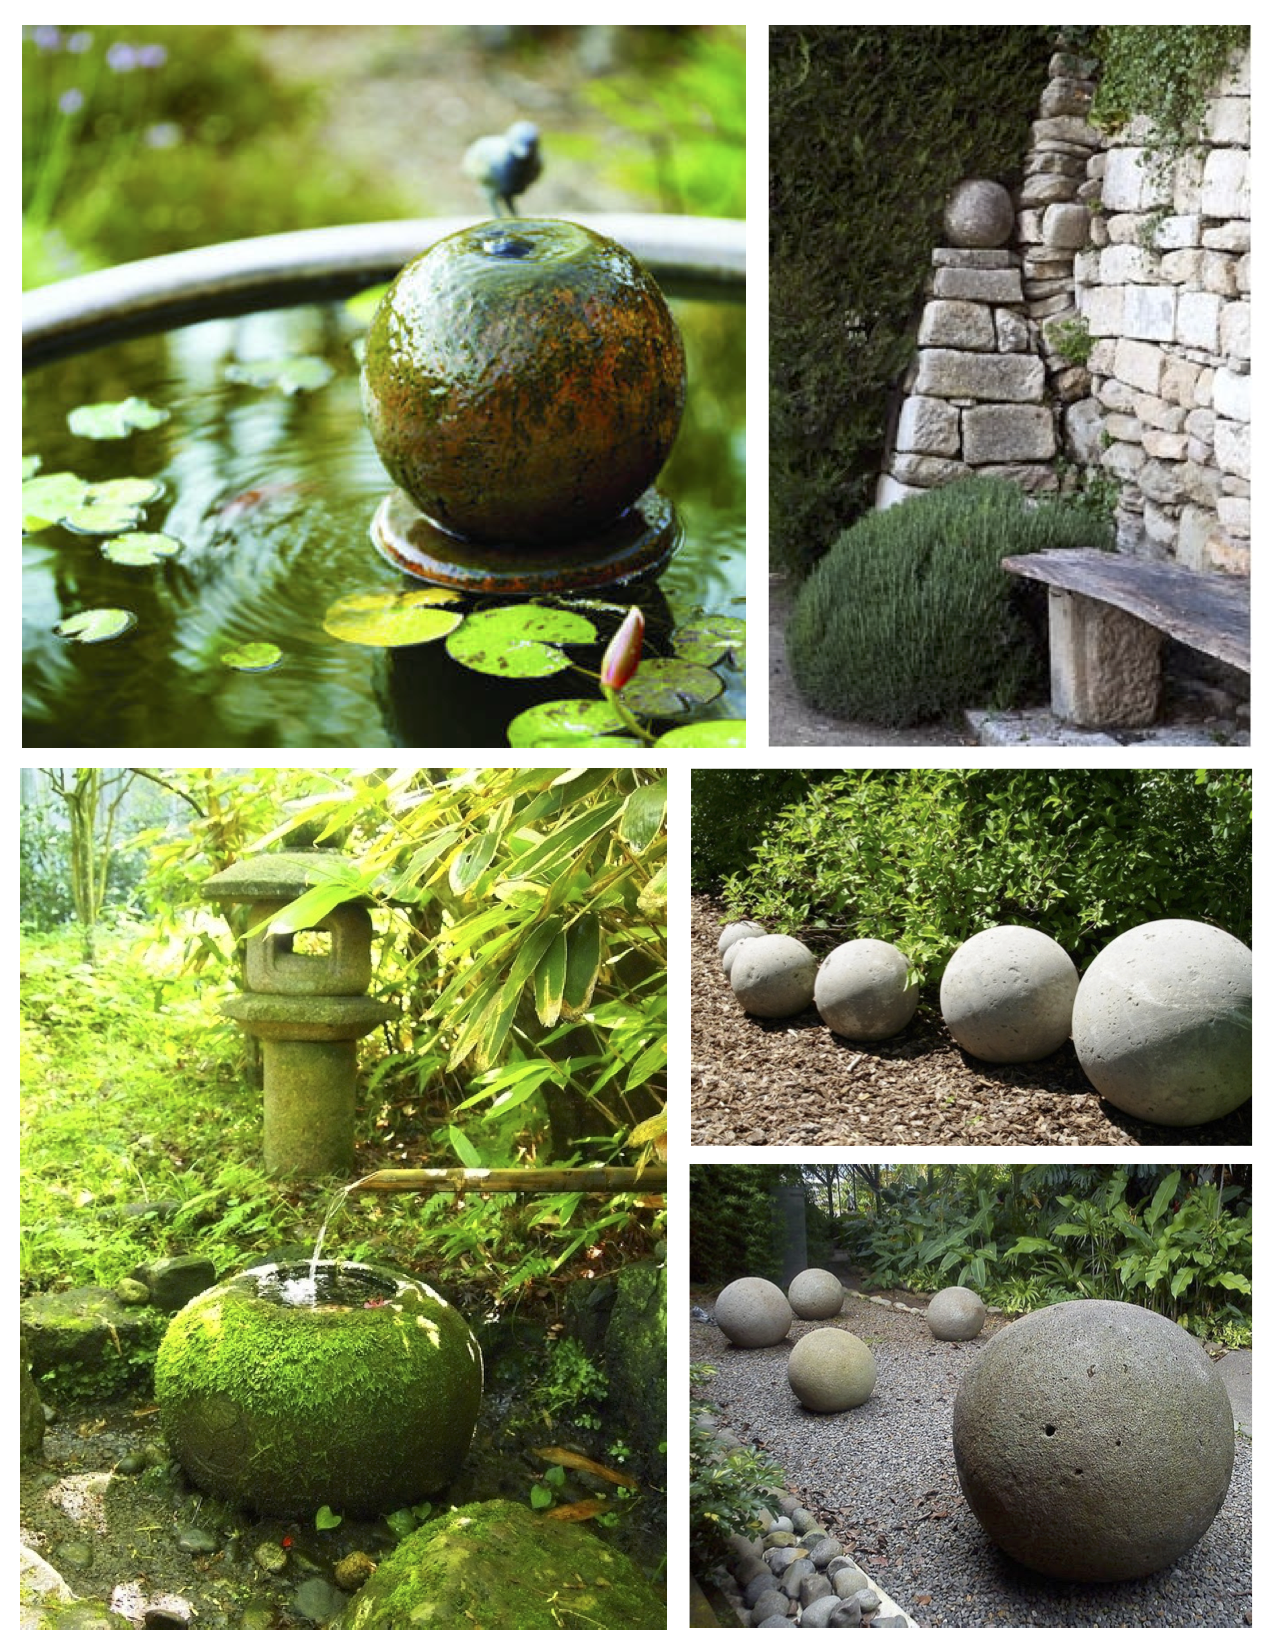 Spherical Objects Within The Garden Landscape